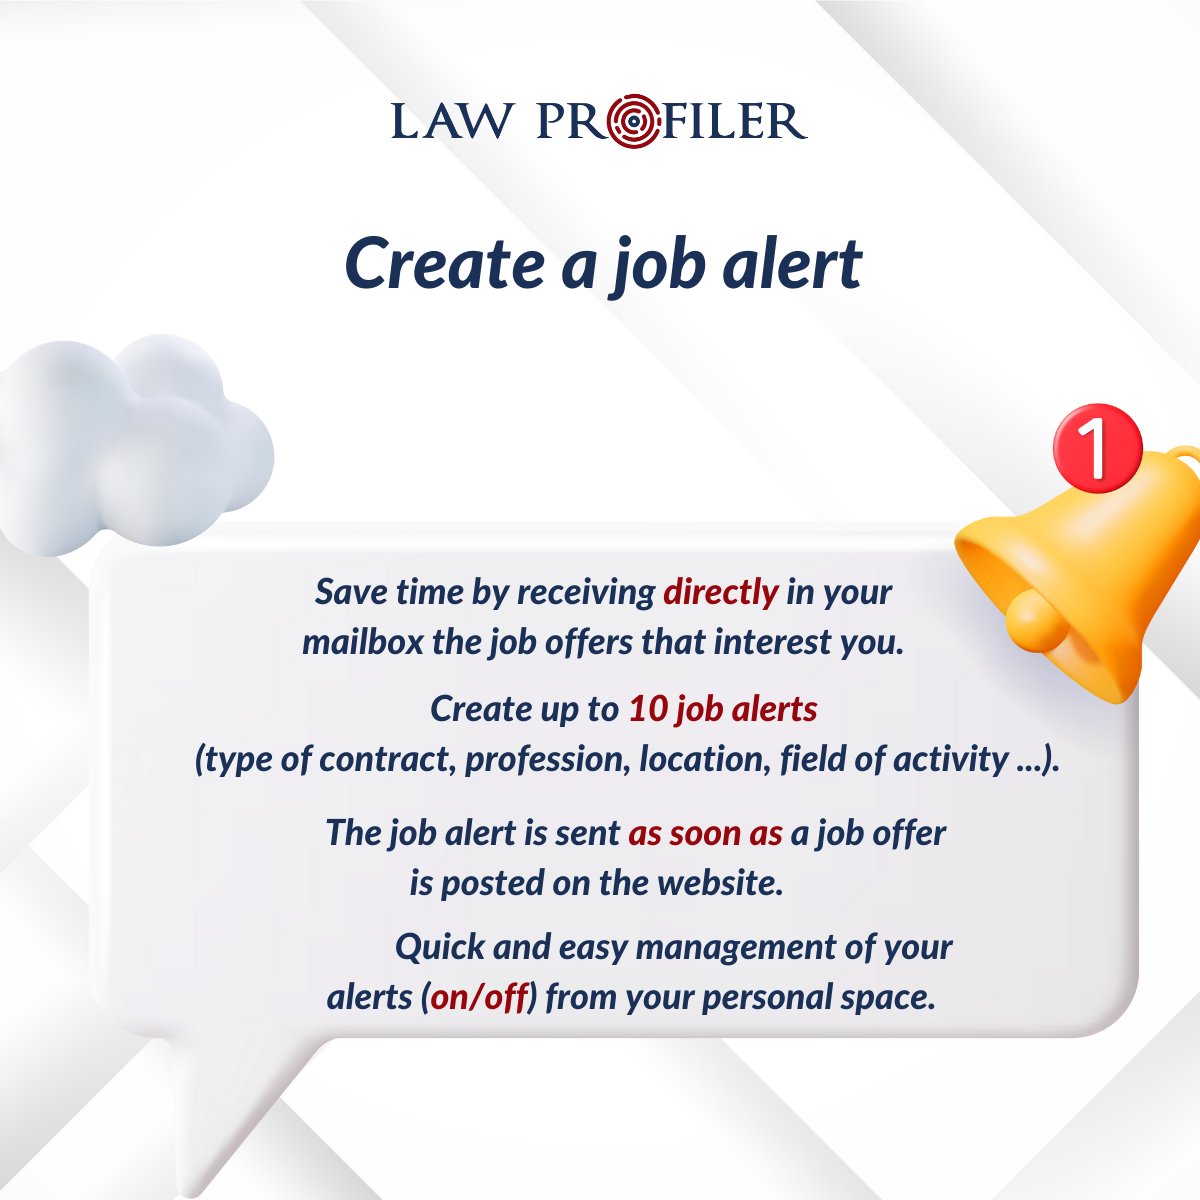 🔔 Your new legal job is already in your mailbox.
LAW PROFILER. Let’s go further, FASTER together.

#lawprofiler #lawyer #hiring #inhouse #legal #job #lawfirm #legaljob #legaljobs #law #Lawyers